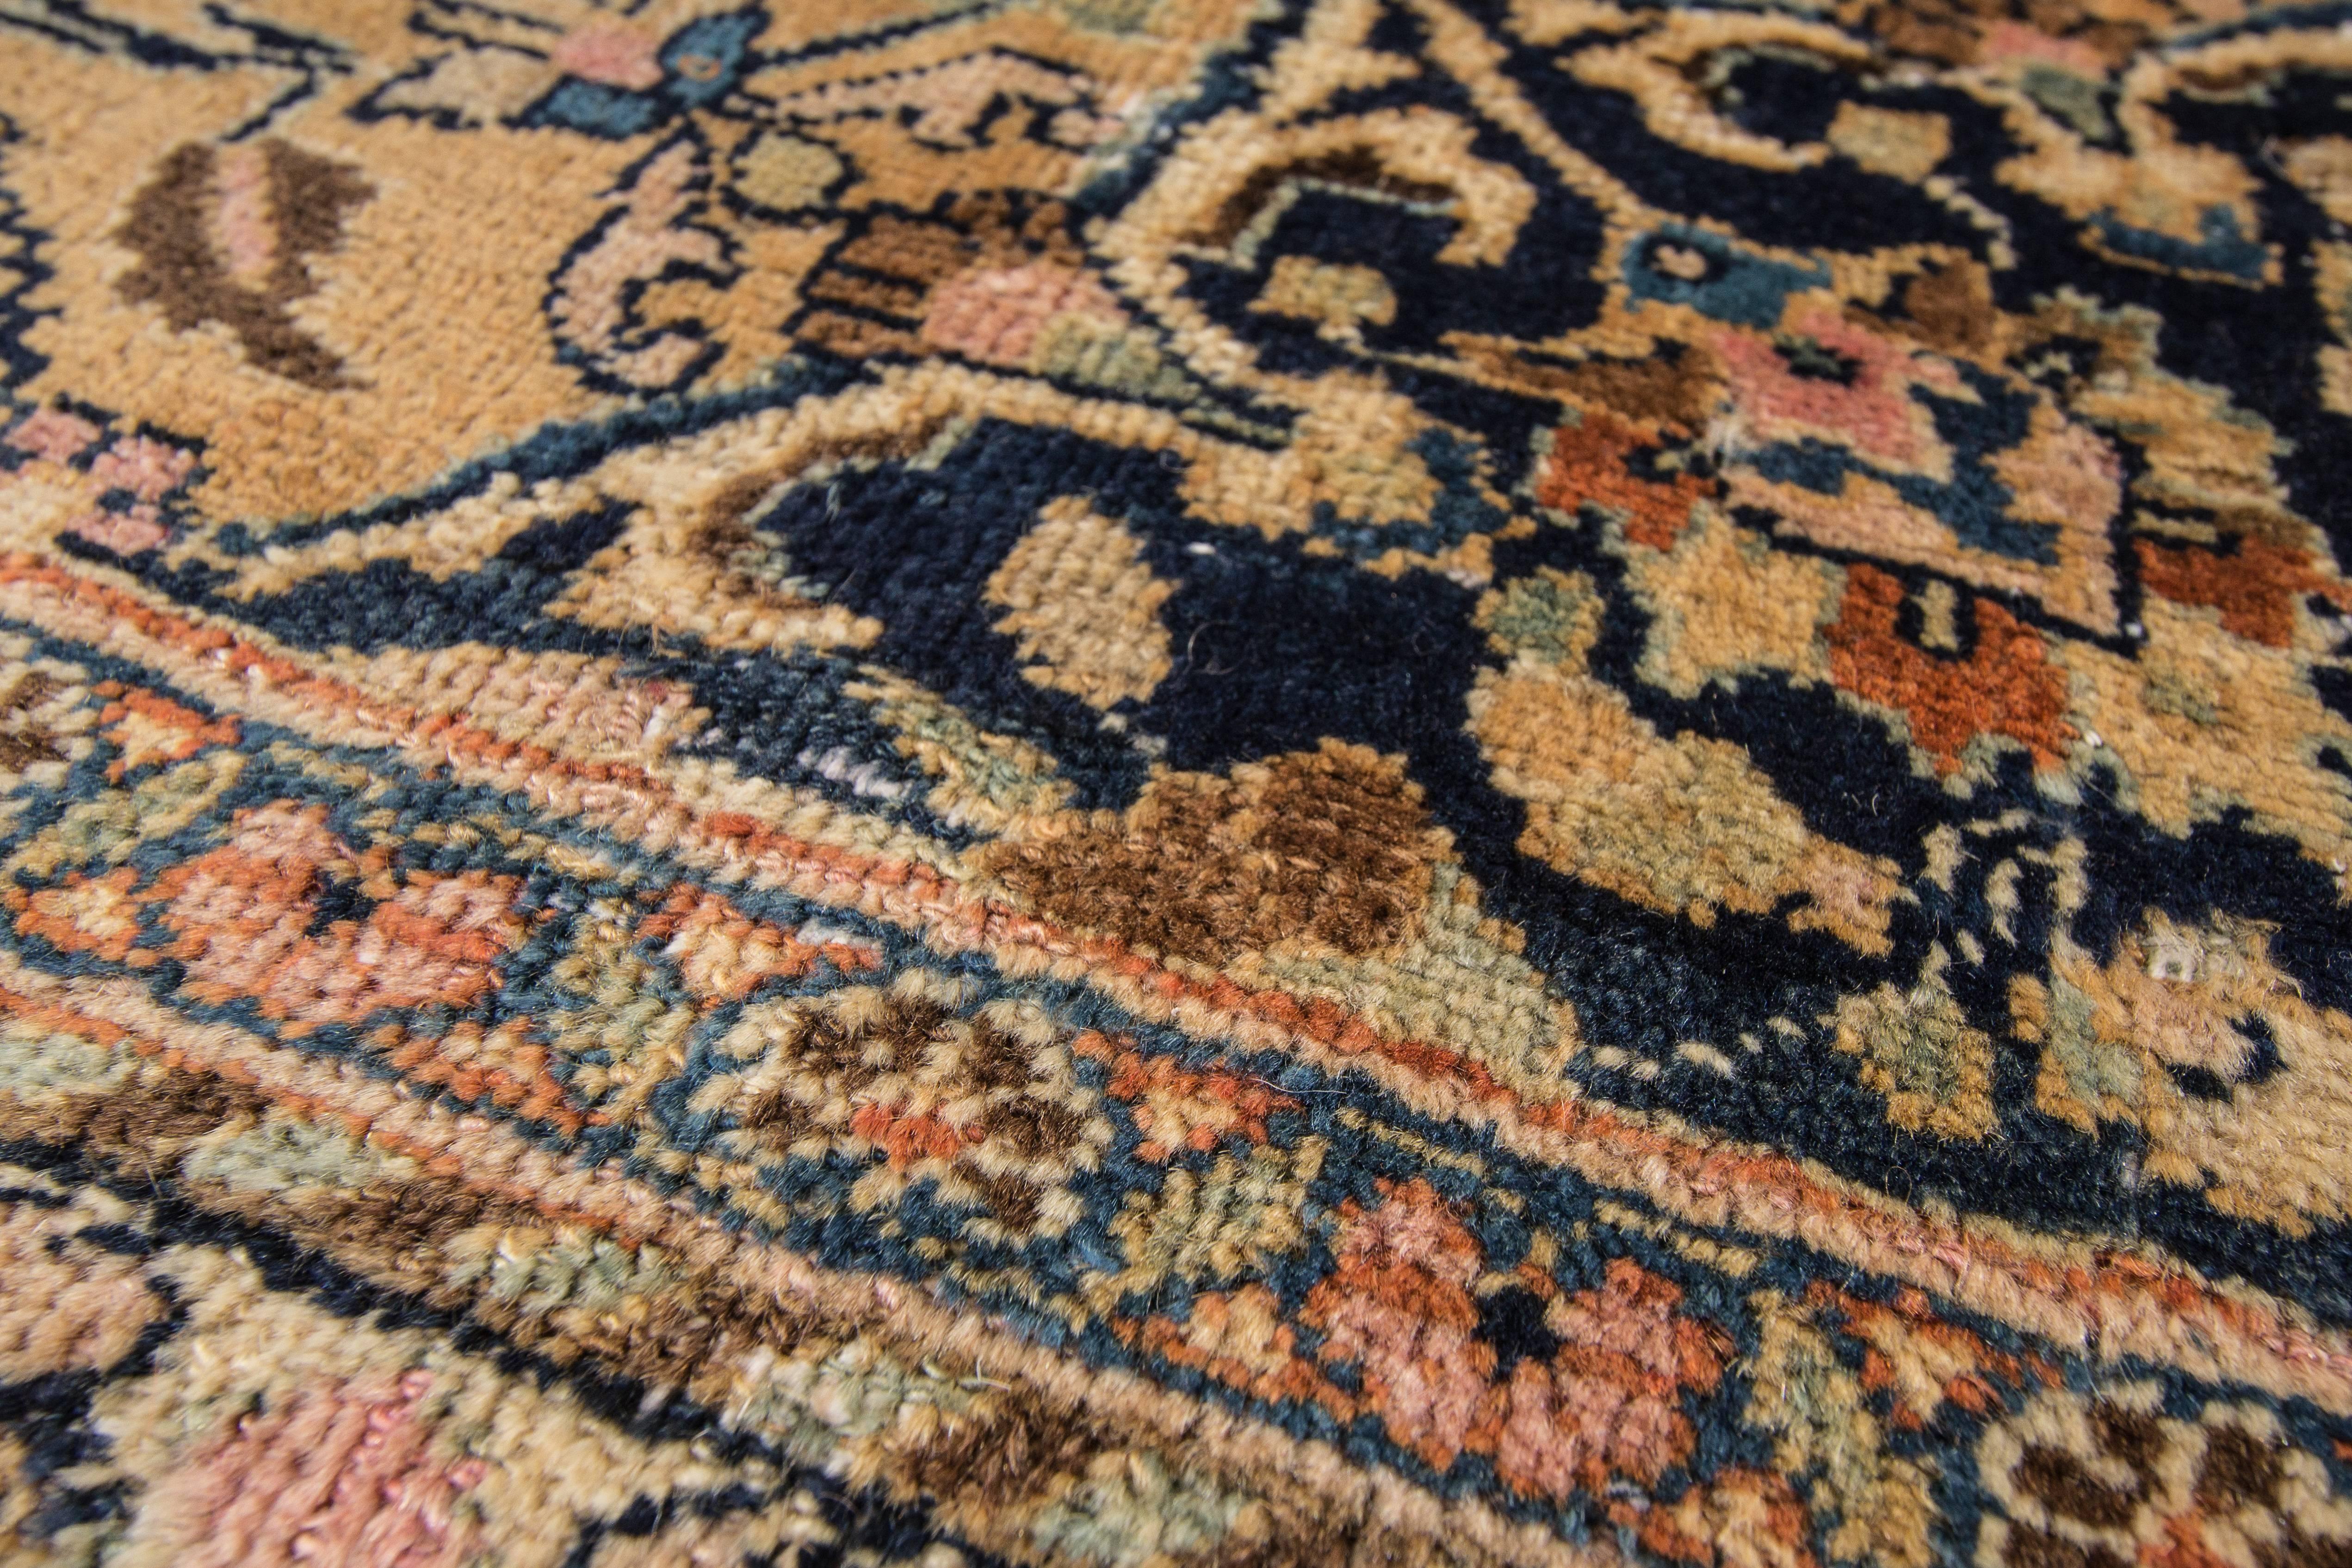 Vintage Woven Persian Mashad Rug In Good Condition For Sale In Norwalk, CT